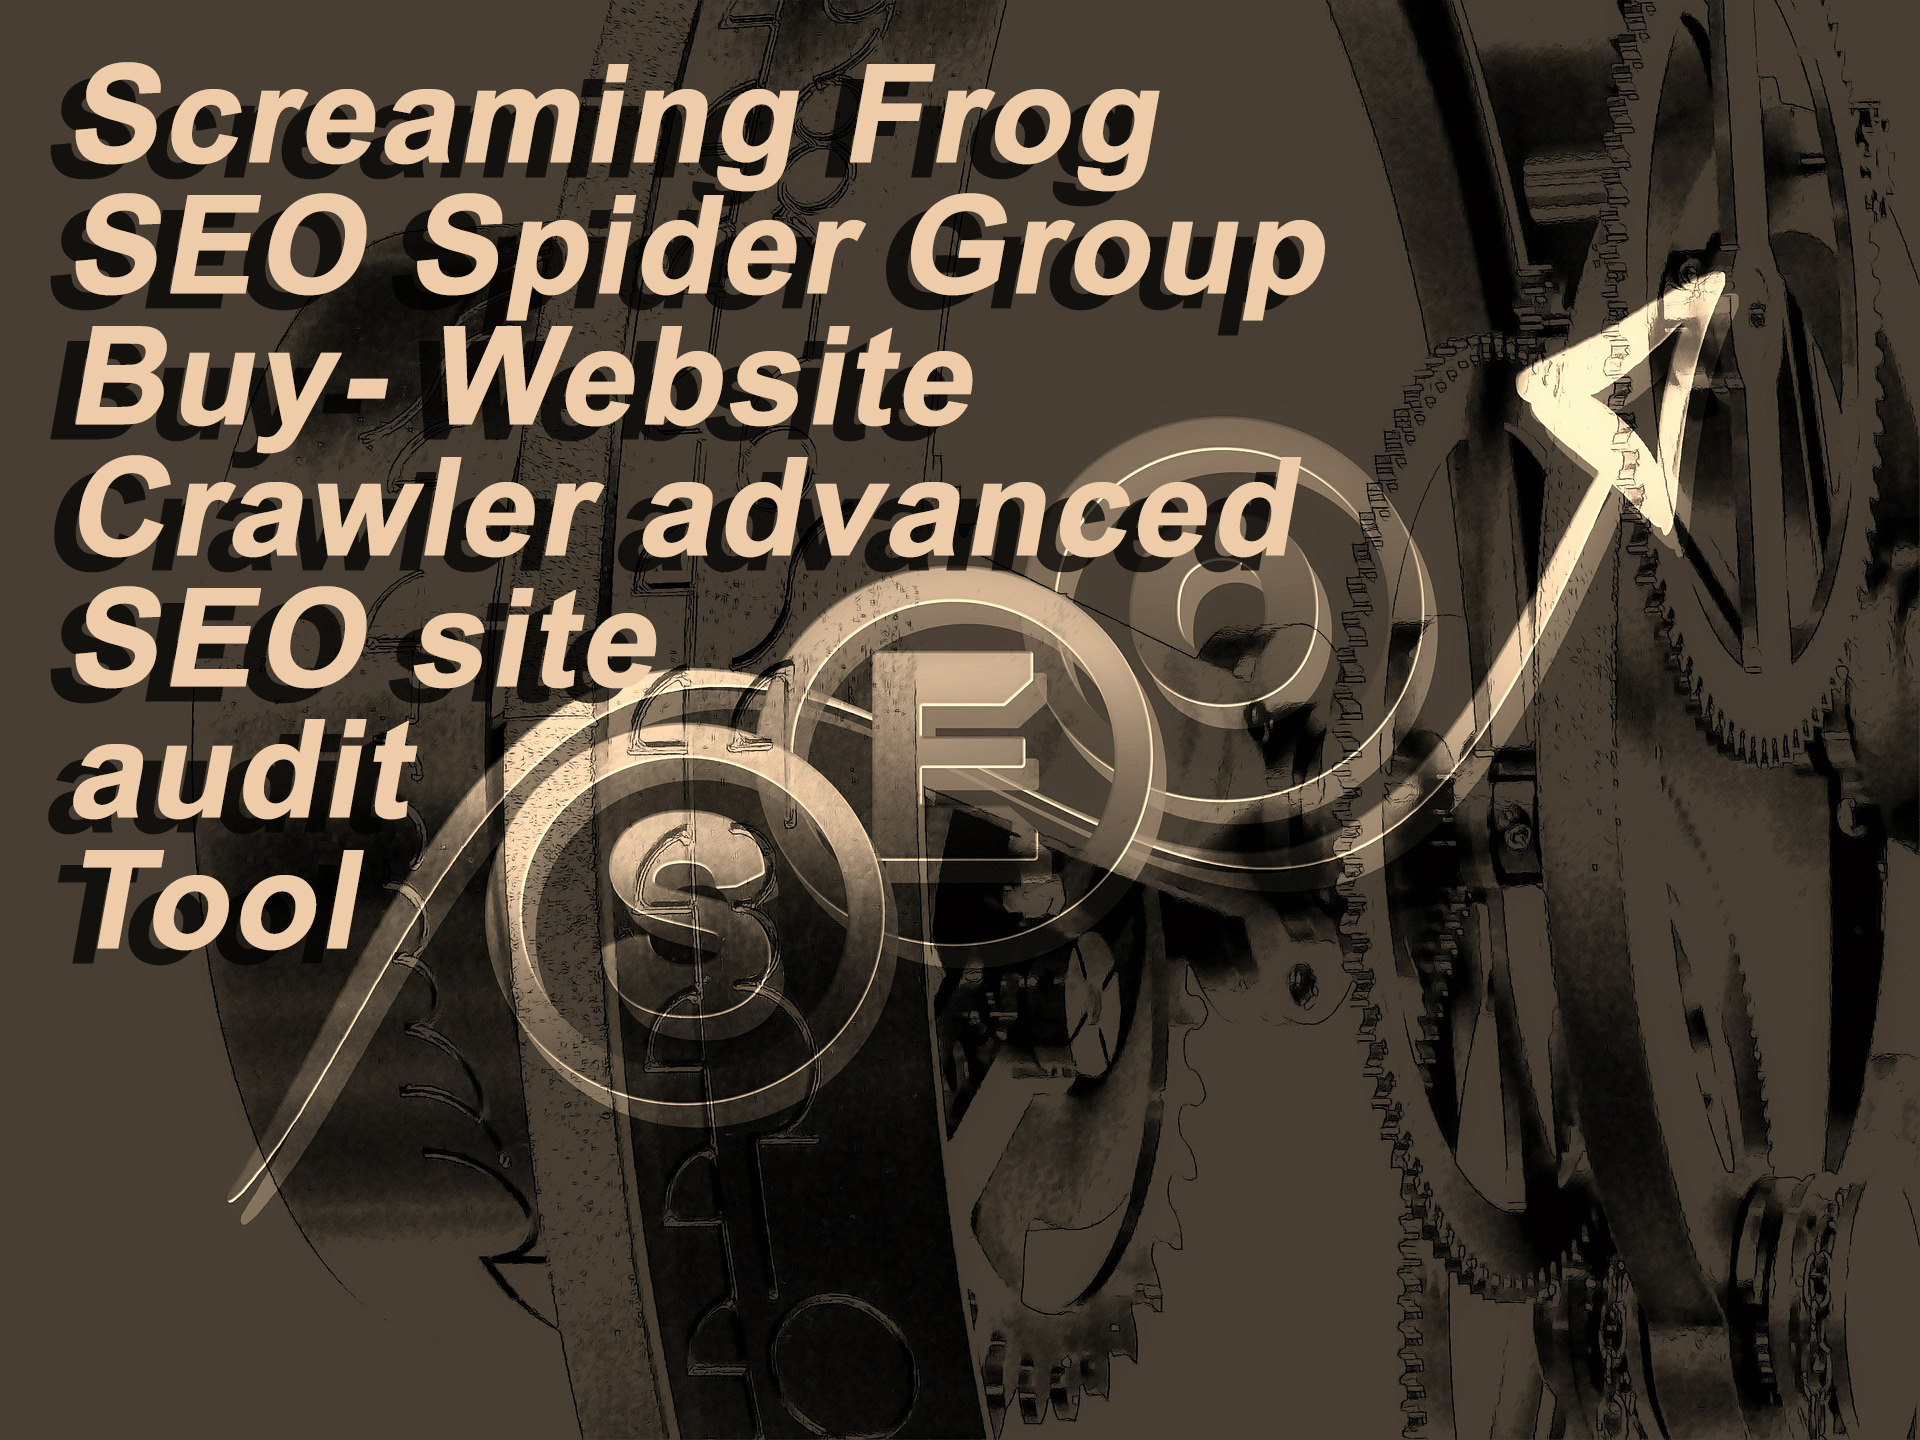 instaling Screaming Frog SEO Spider 19.1